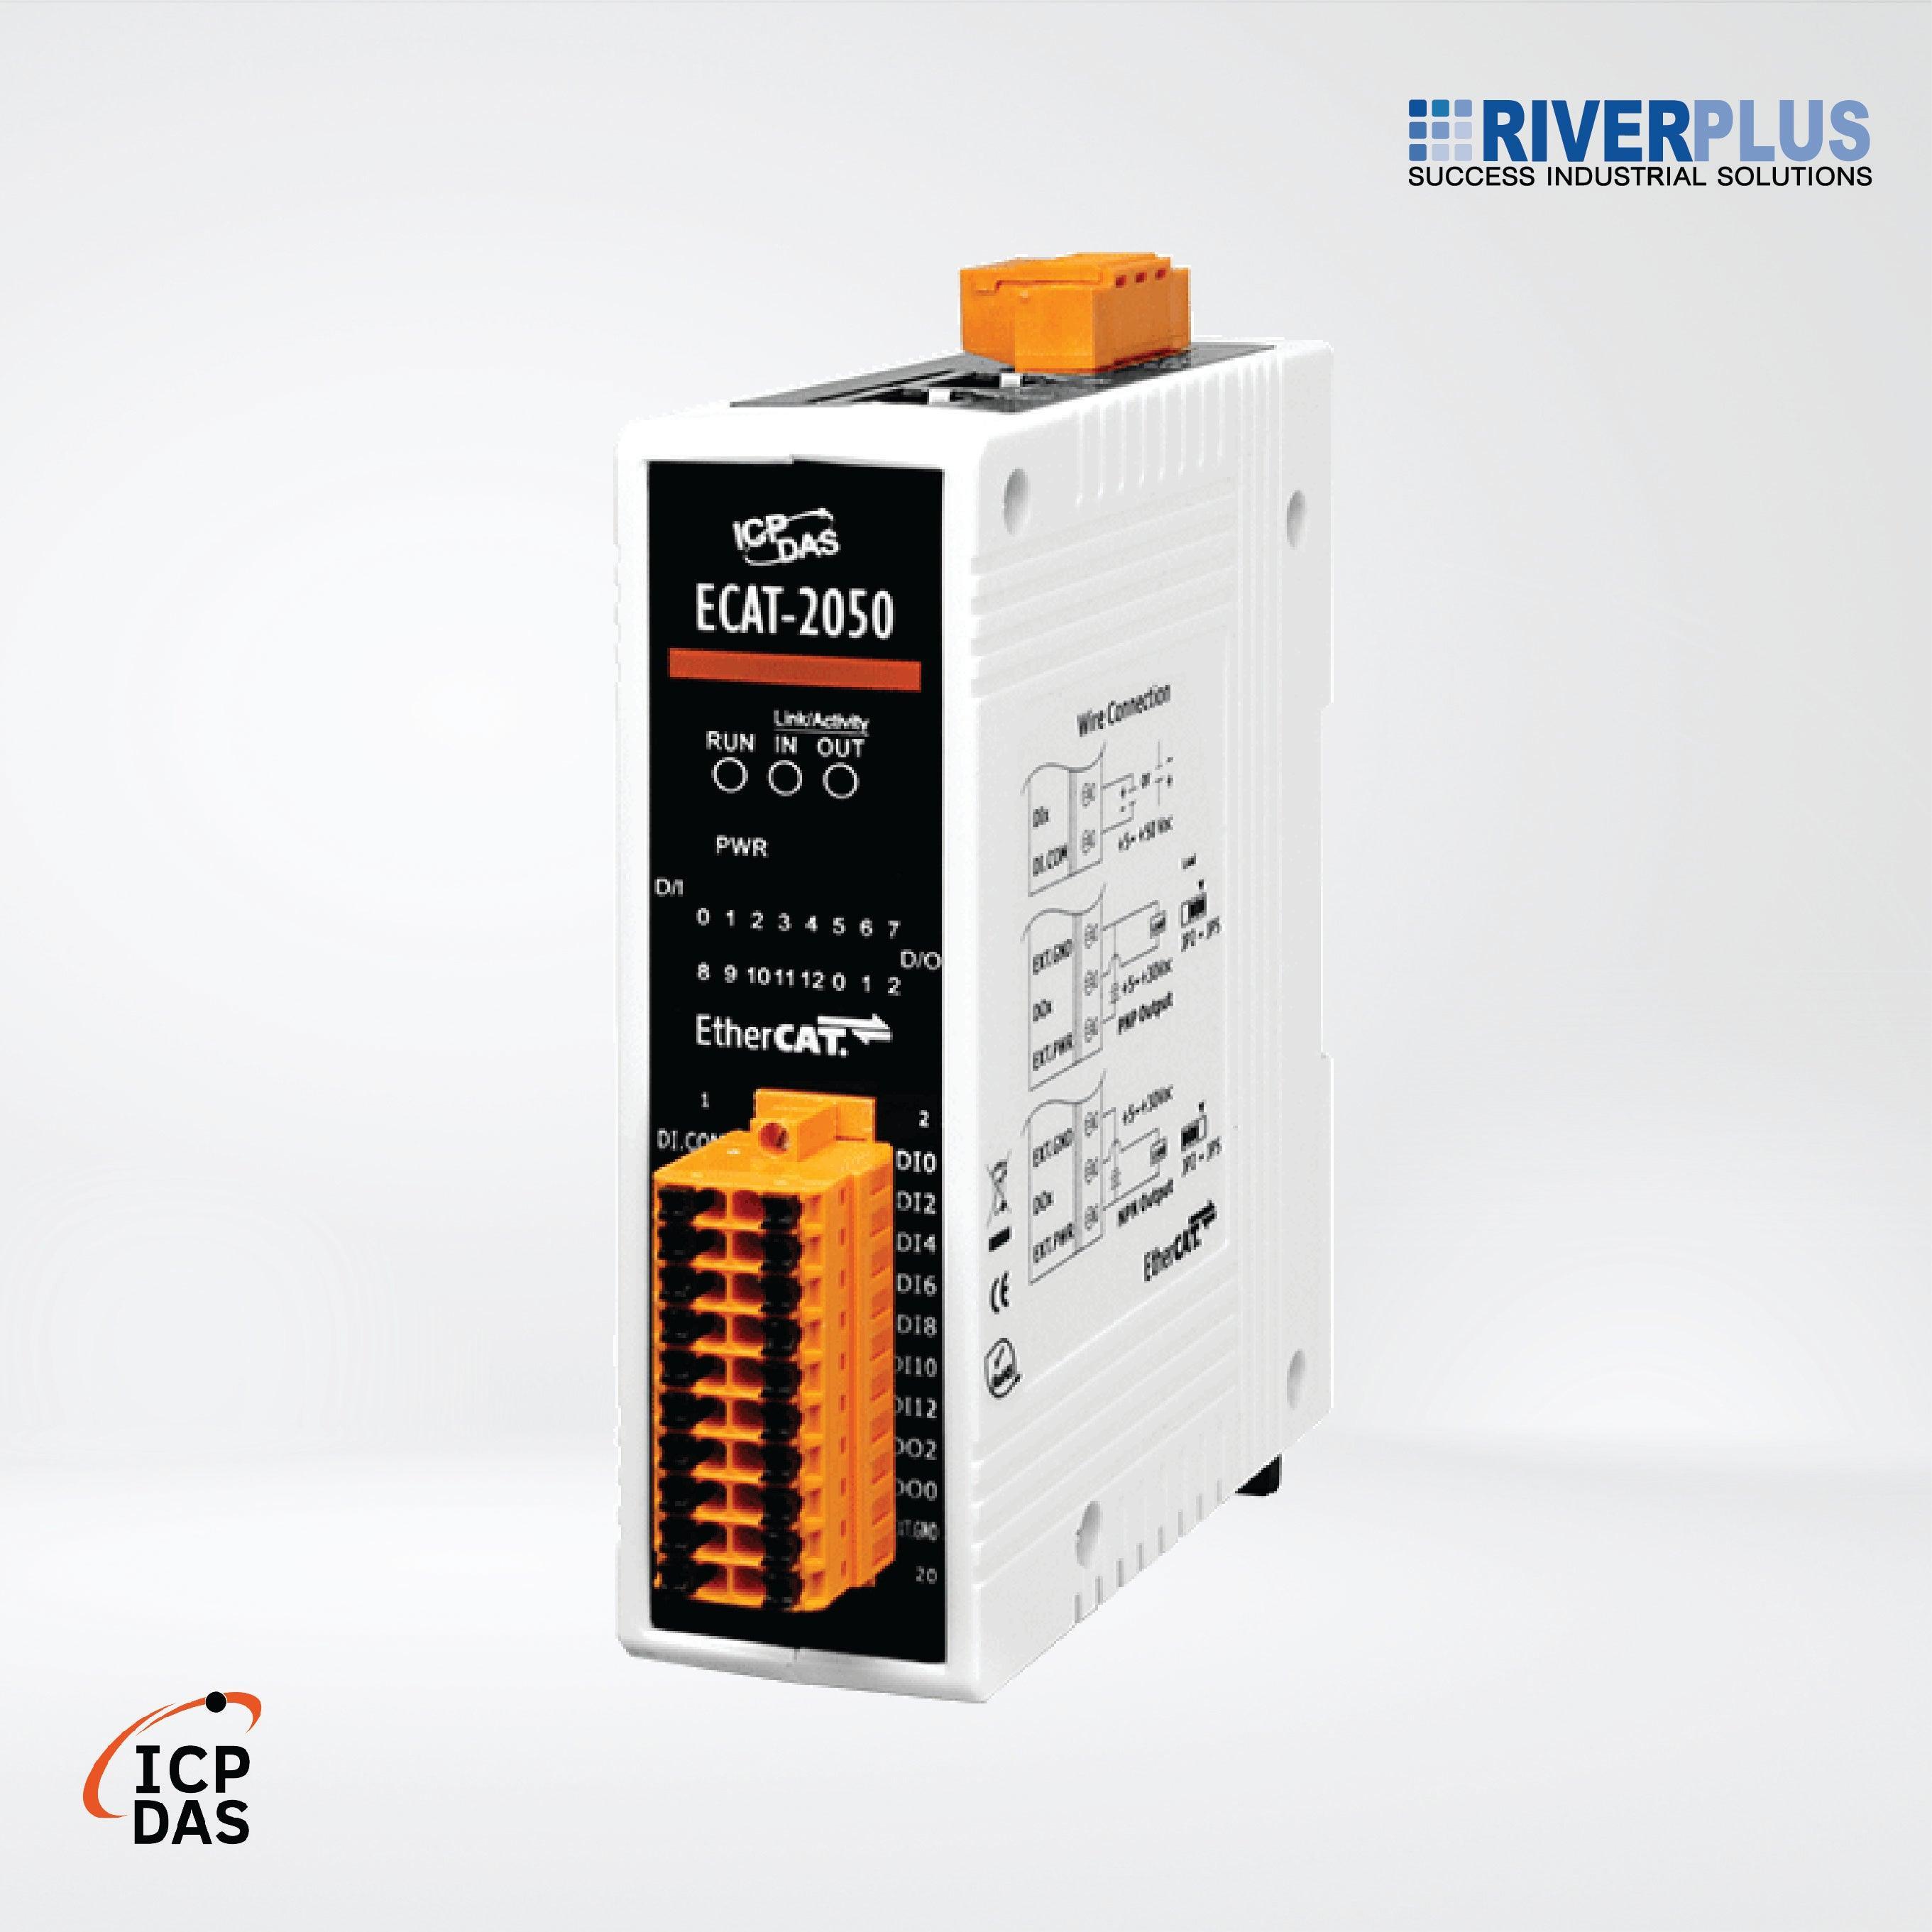 ECAT-2050 EtherCAT Slave I/O Module with Isolated 13-ch DI and 4-ch DO - Riverplus